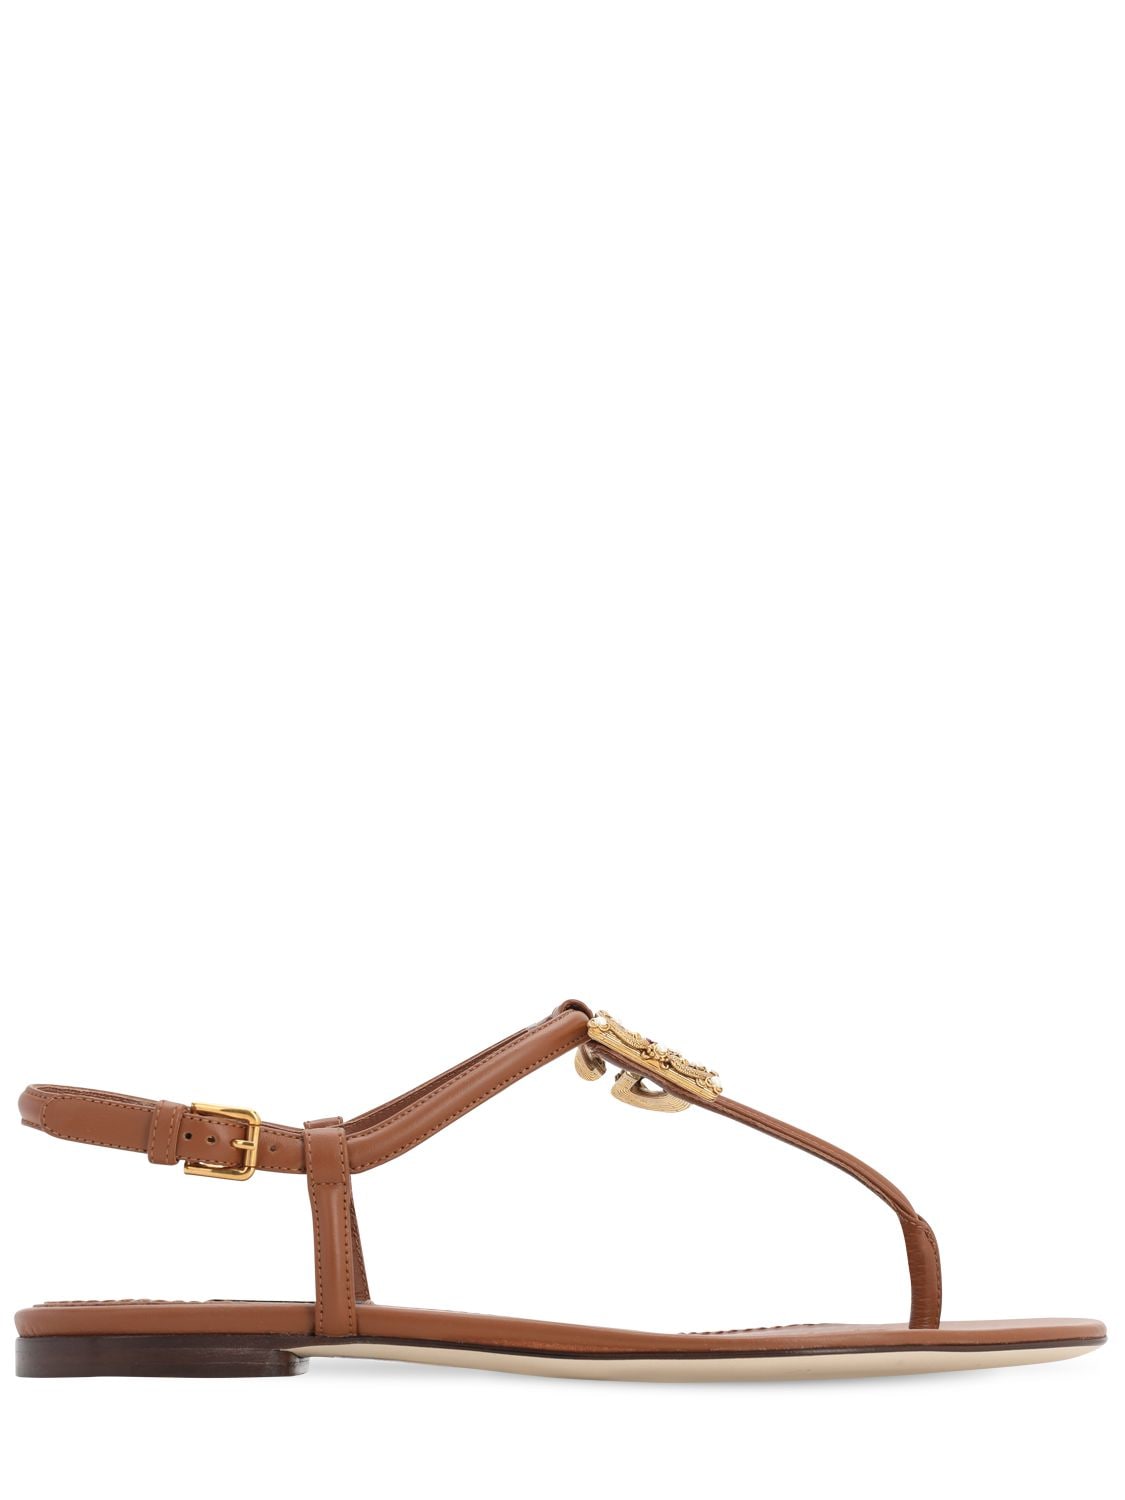 Dolce & Gabbana 10mm Logo Leather Thong Sandals In Tan | ModeSens